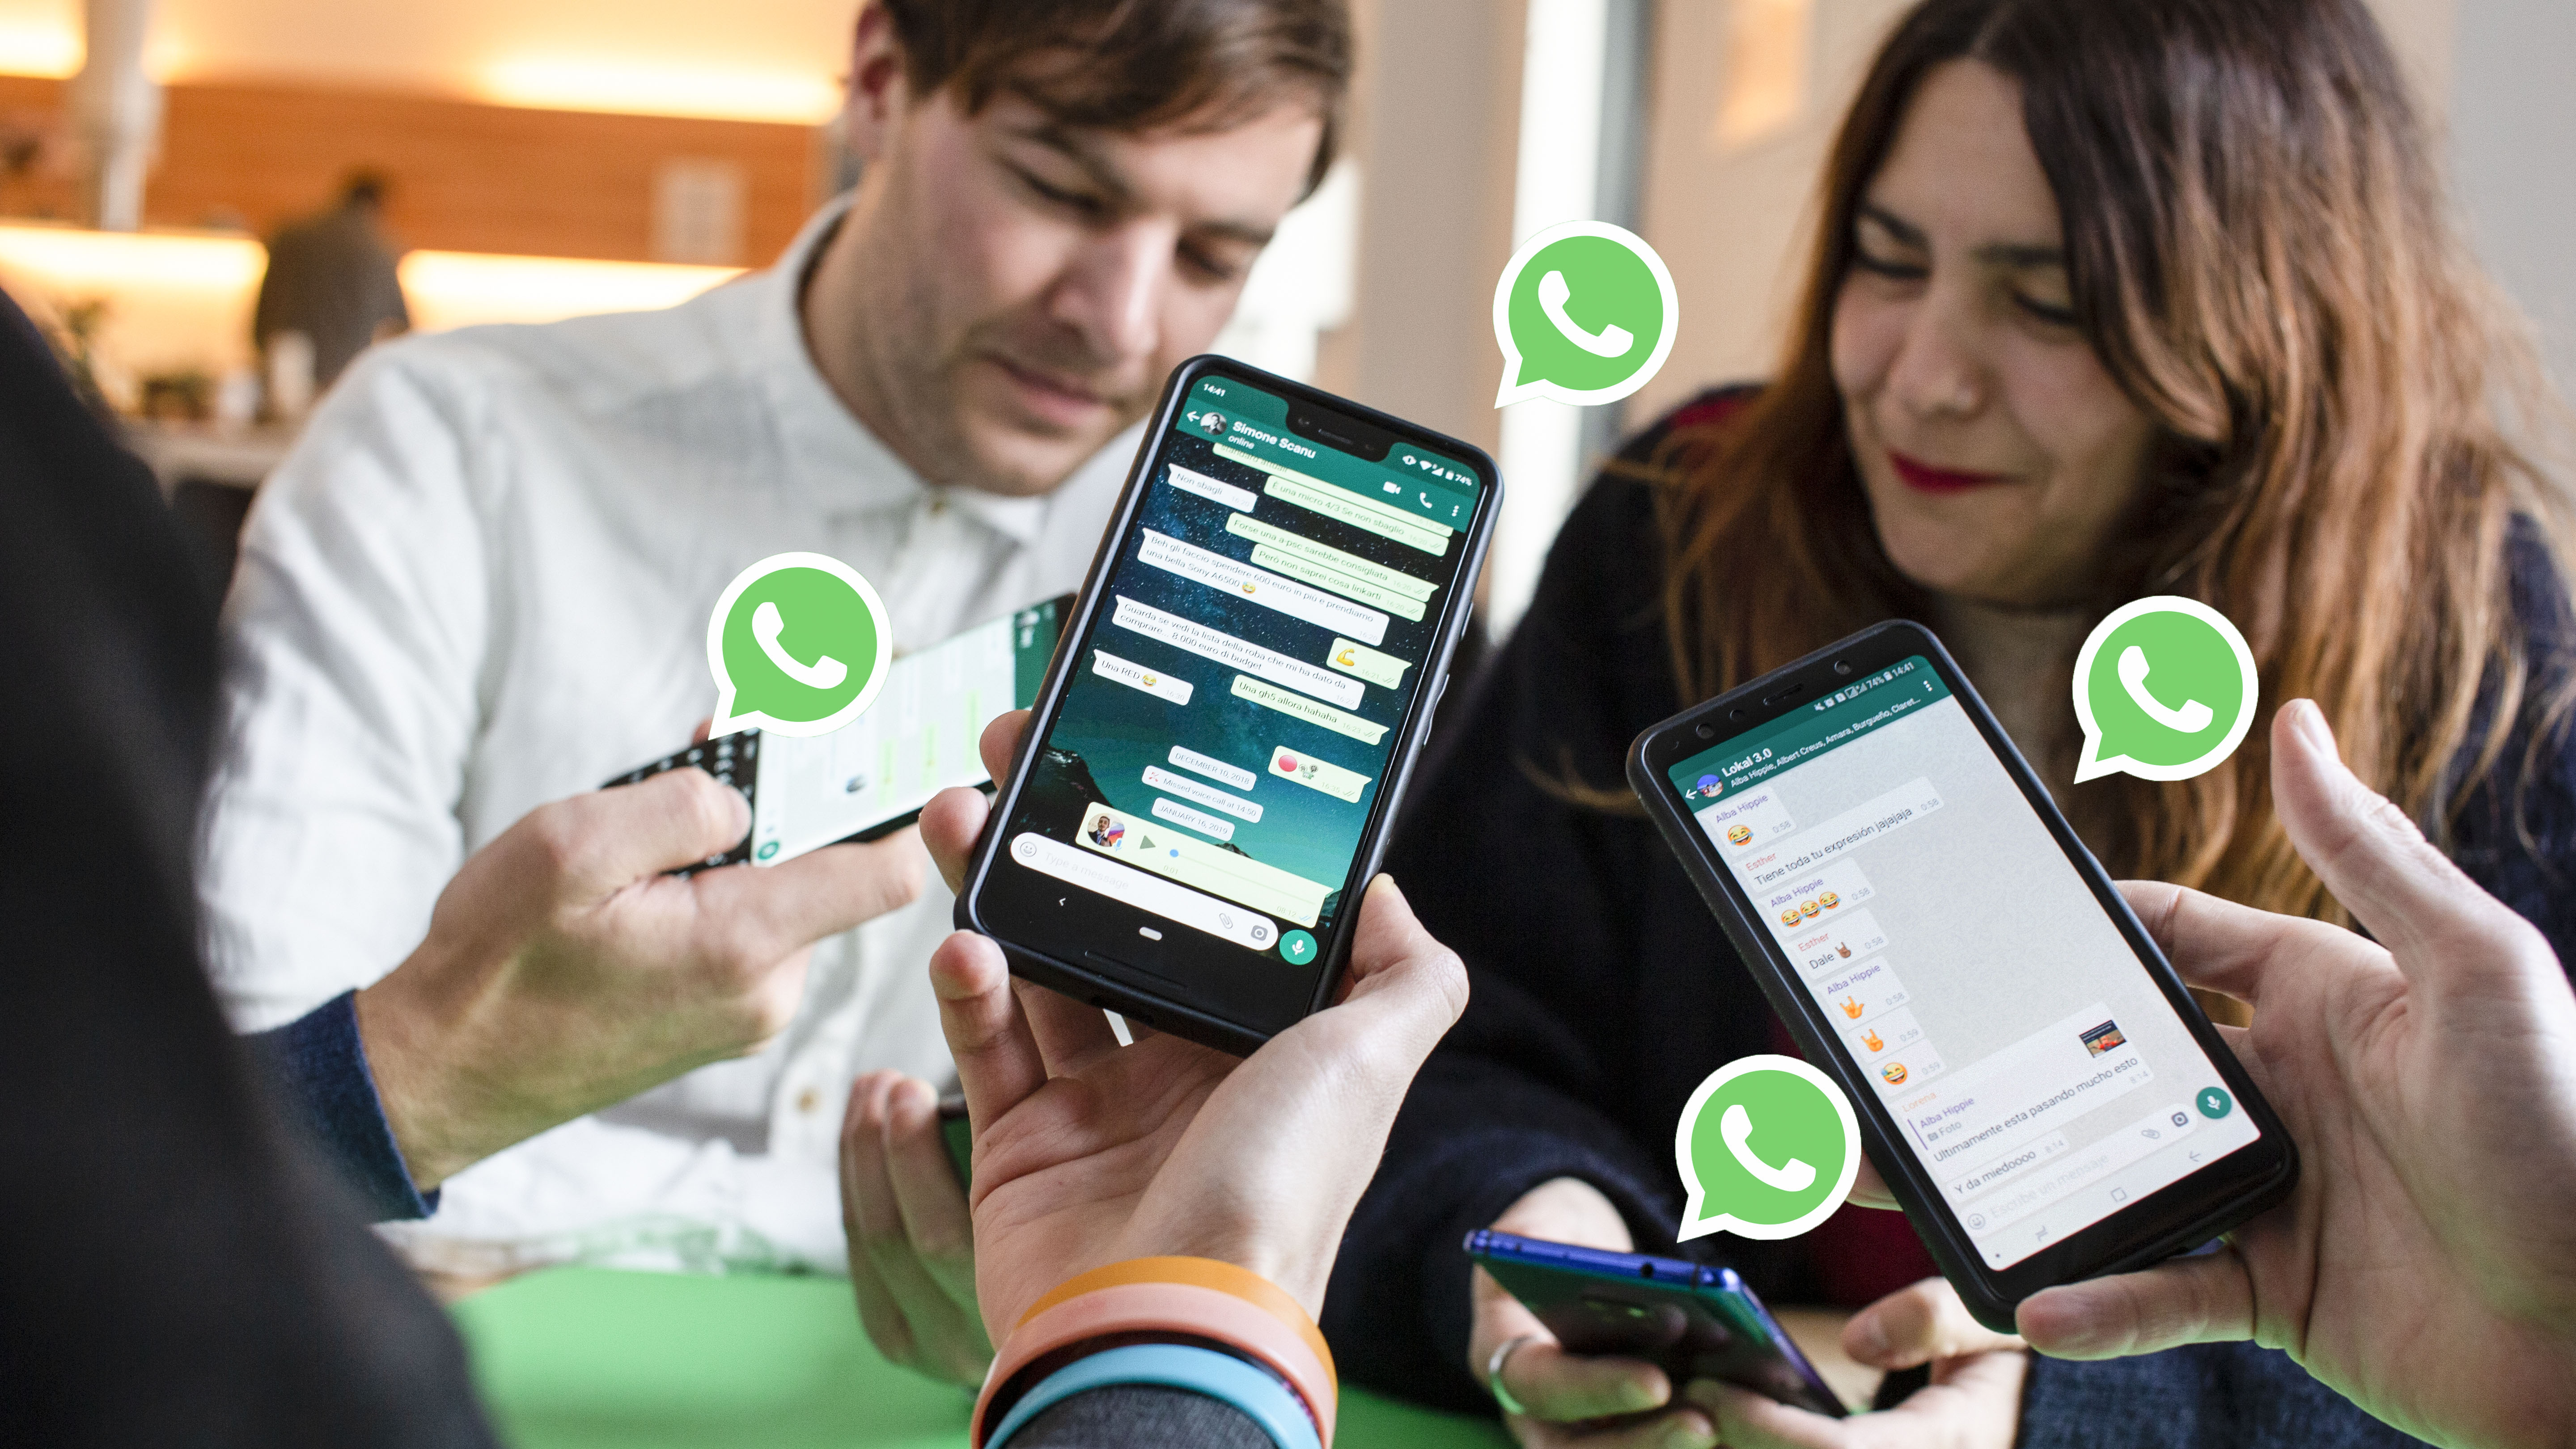 How to chat on WhatsApp without appearing online NextPit.